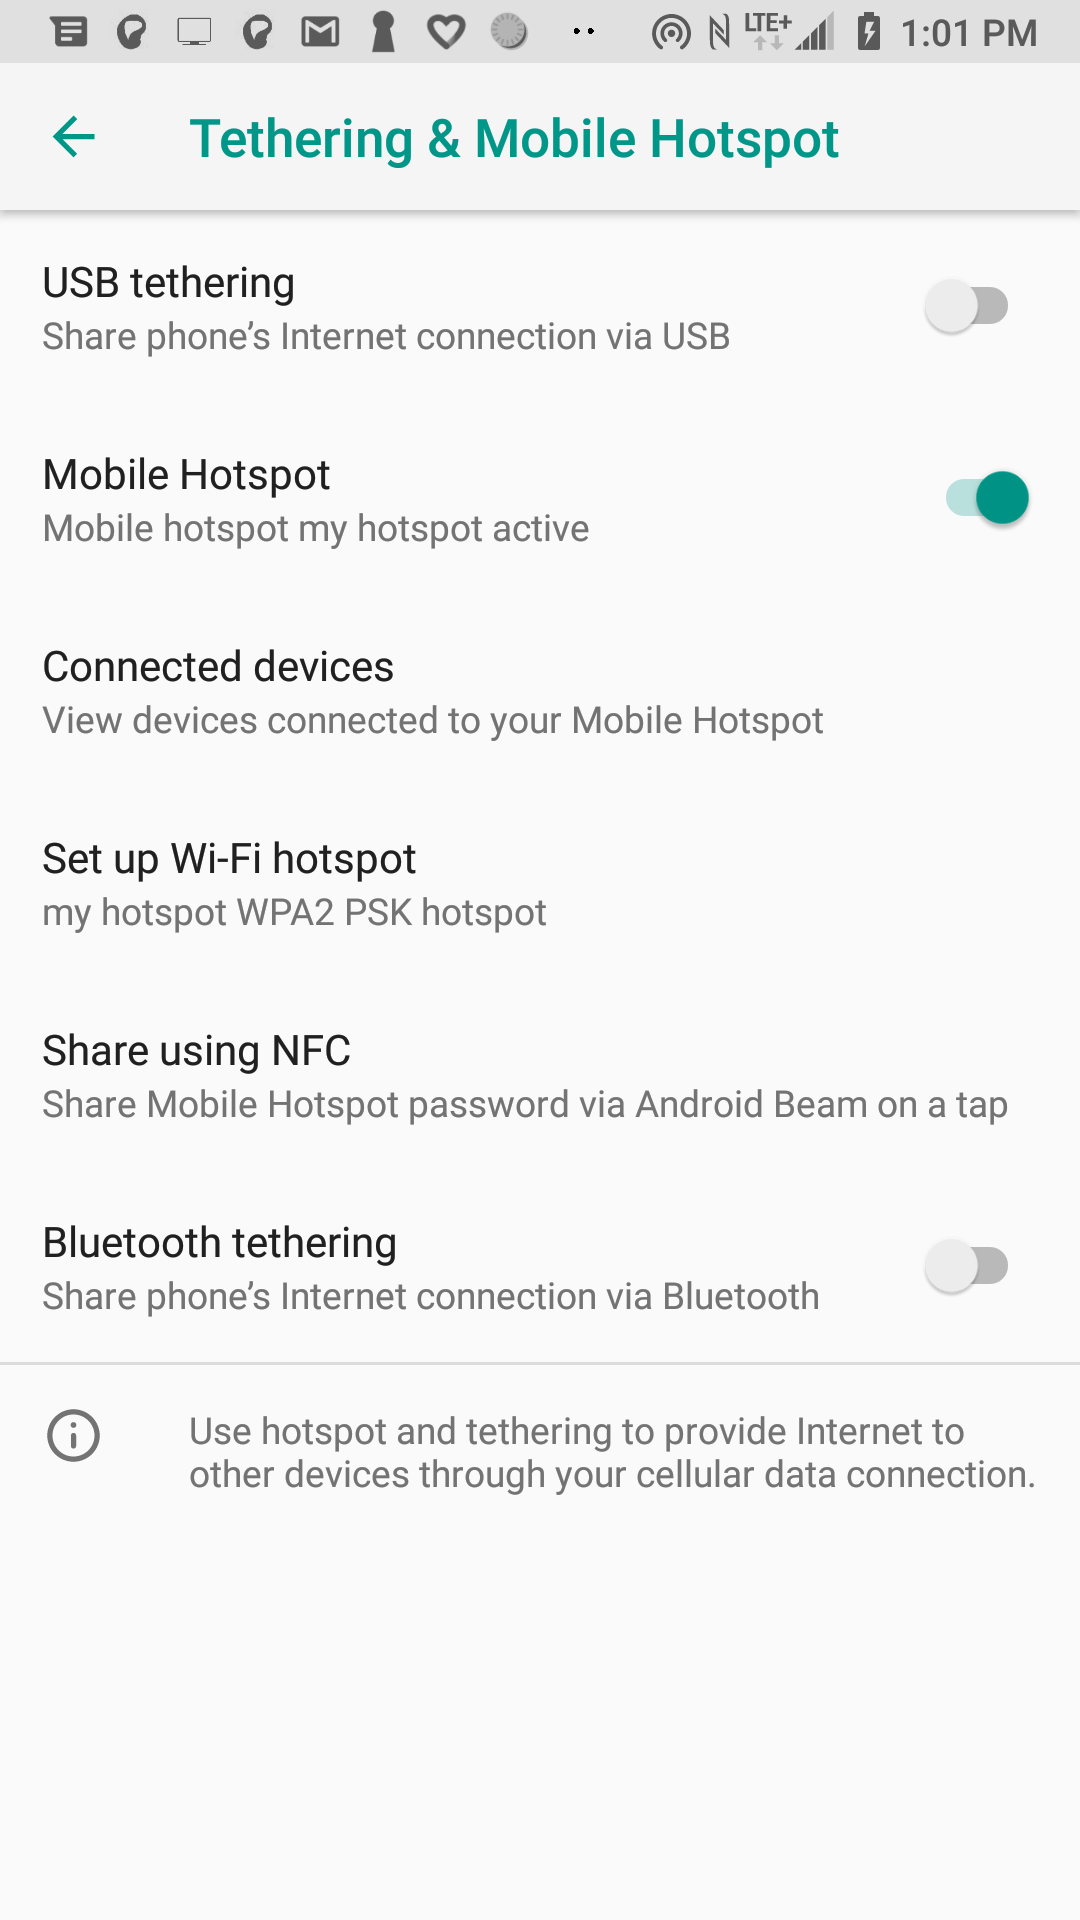 Touch the Mobile Hotspot slider to turn on the hotspot.